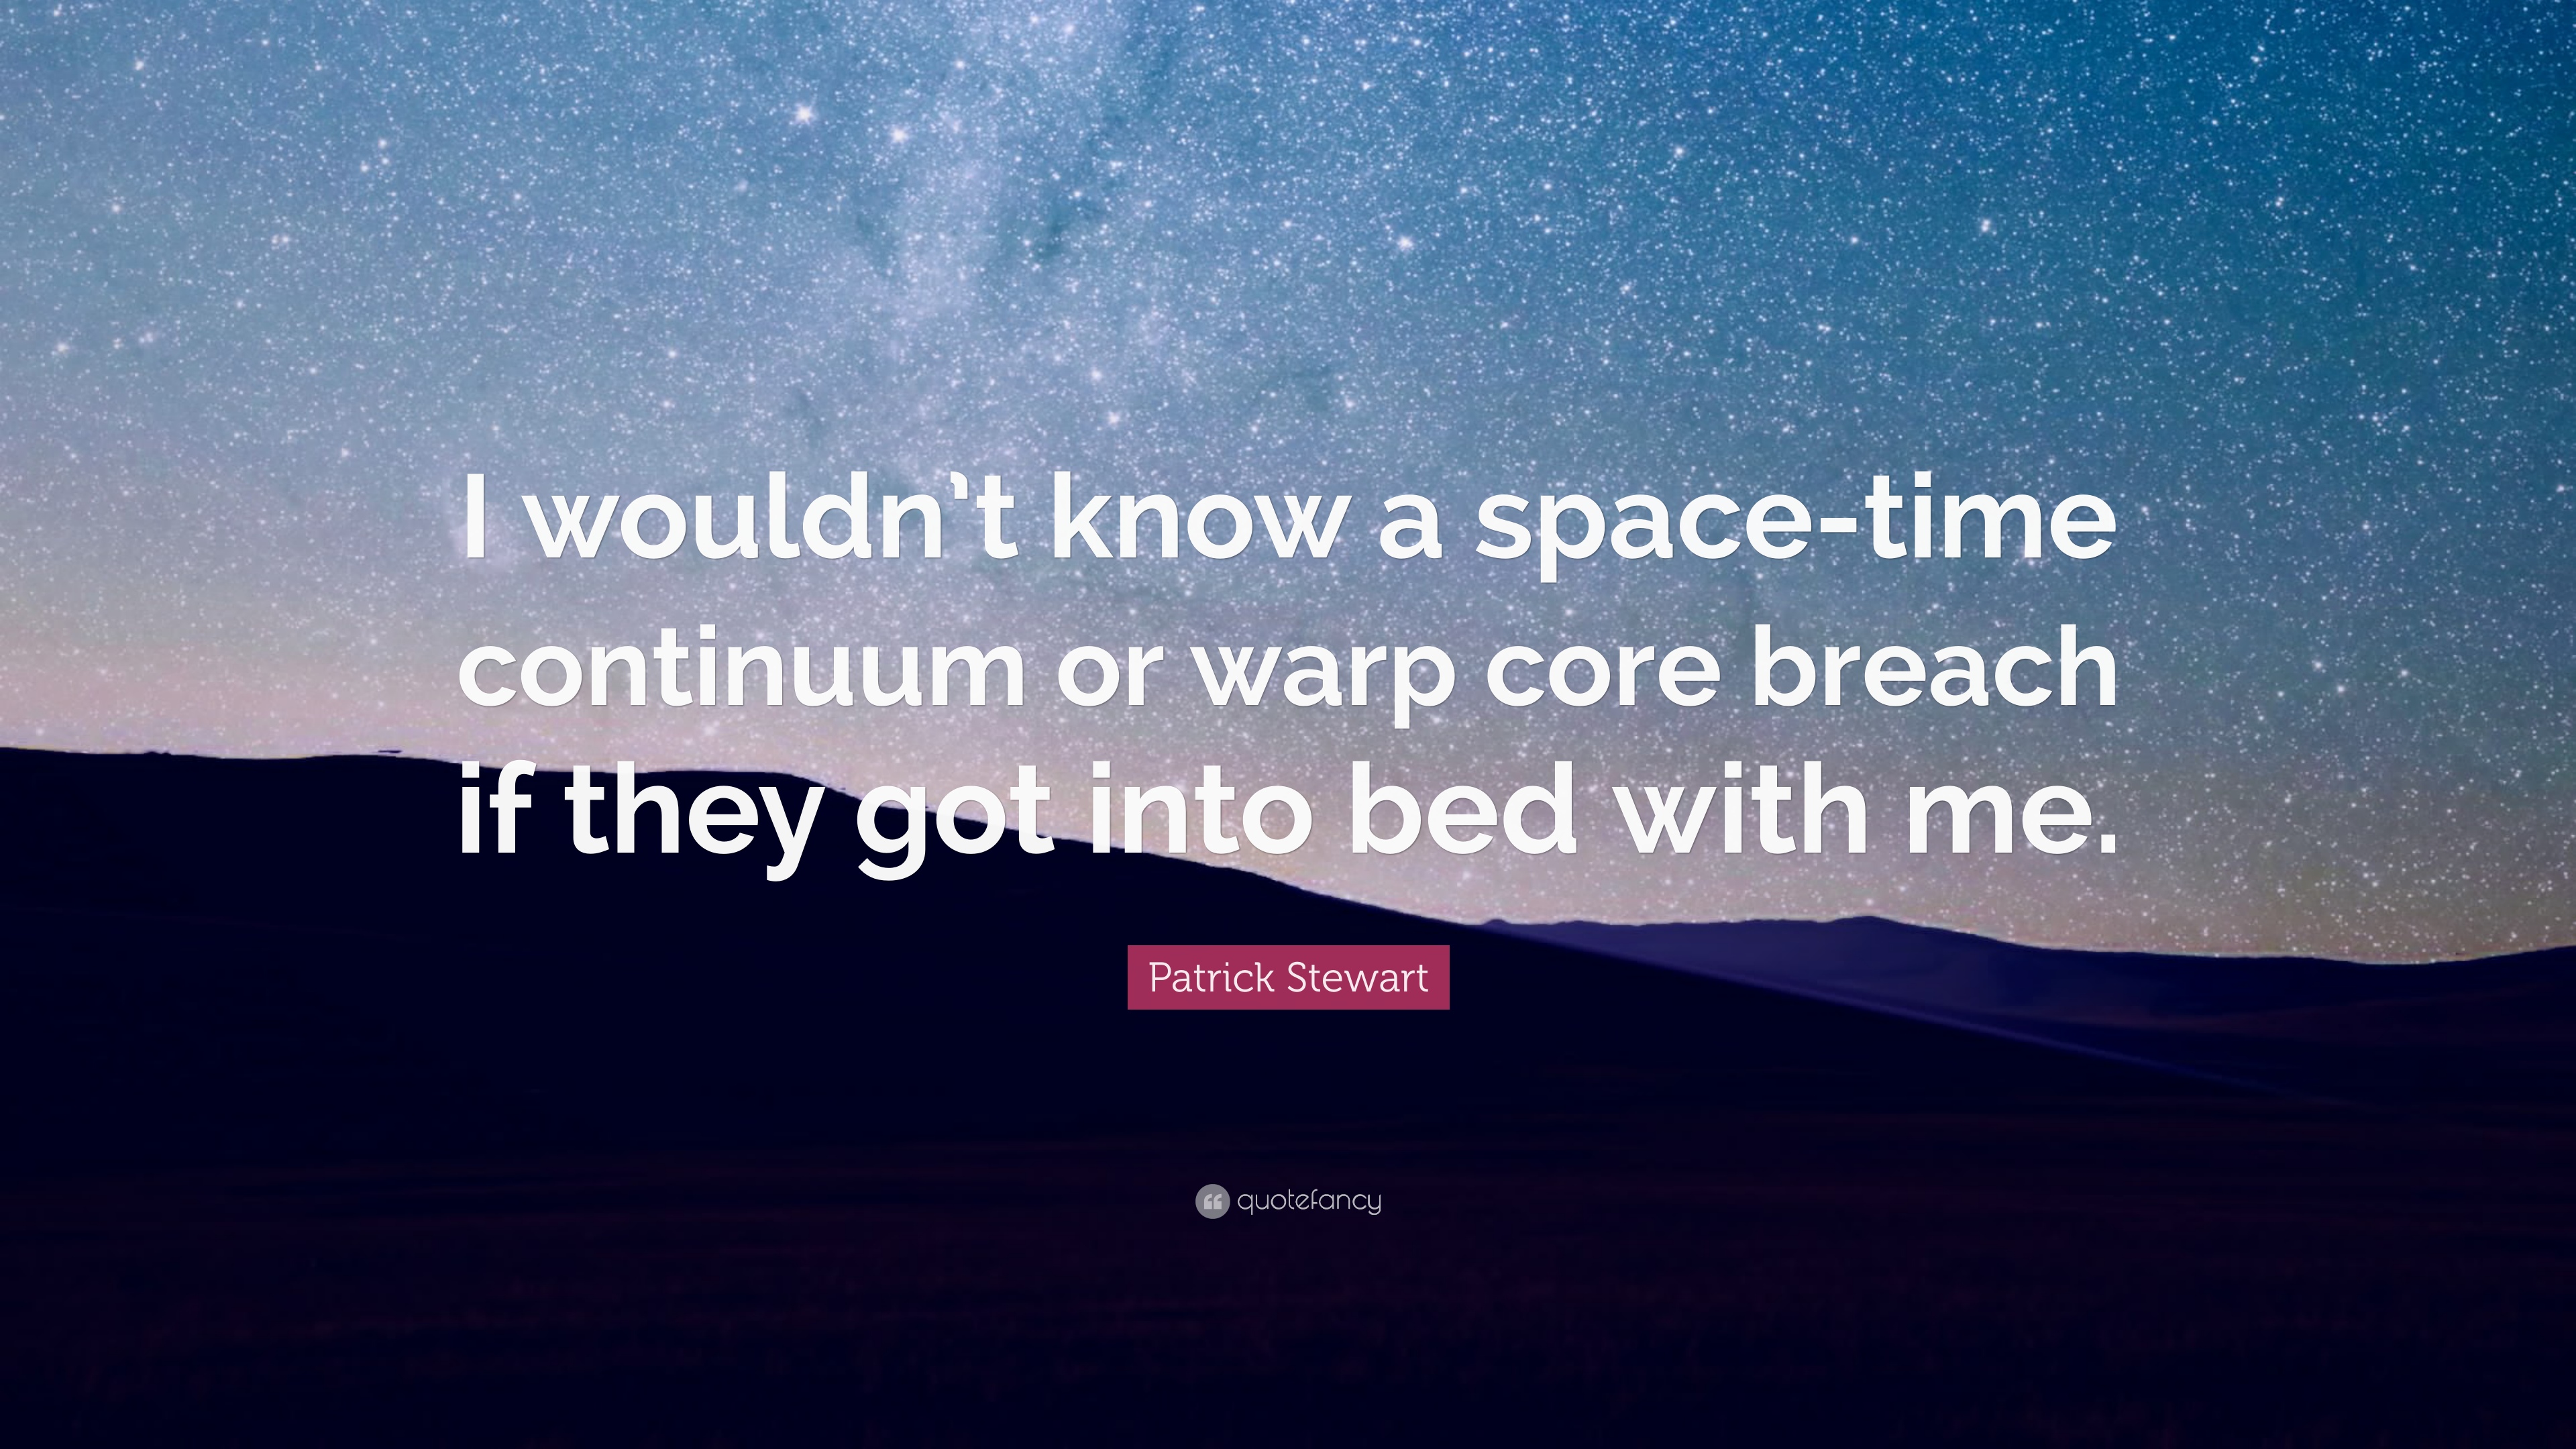 Patrick Stewart Quote: “I Wouldn't Know A Space Time